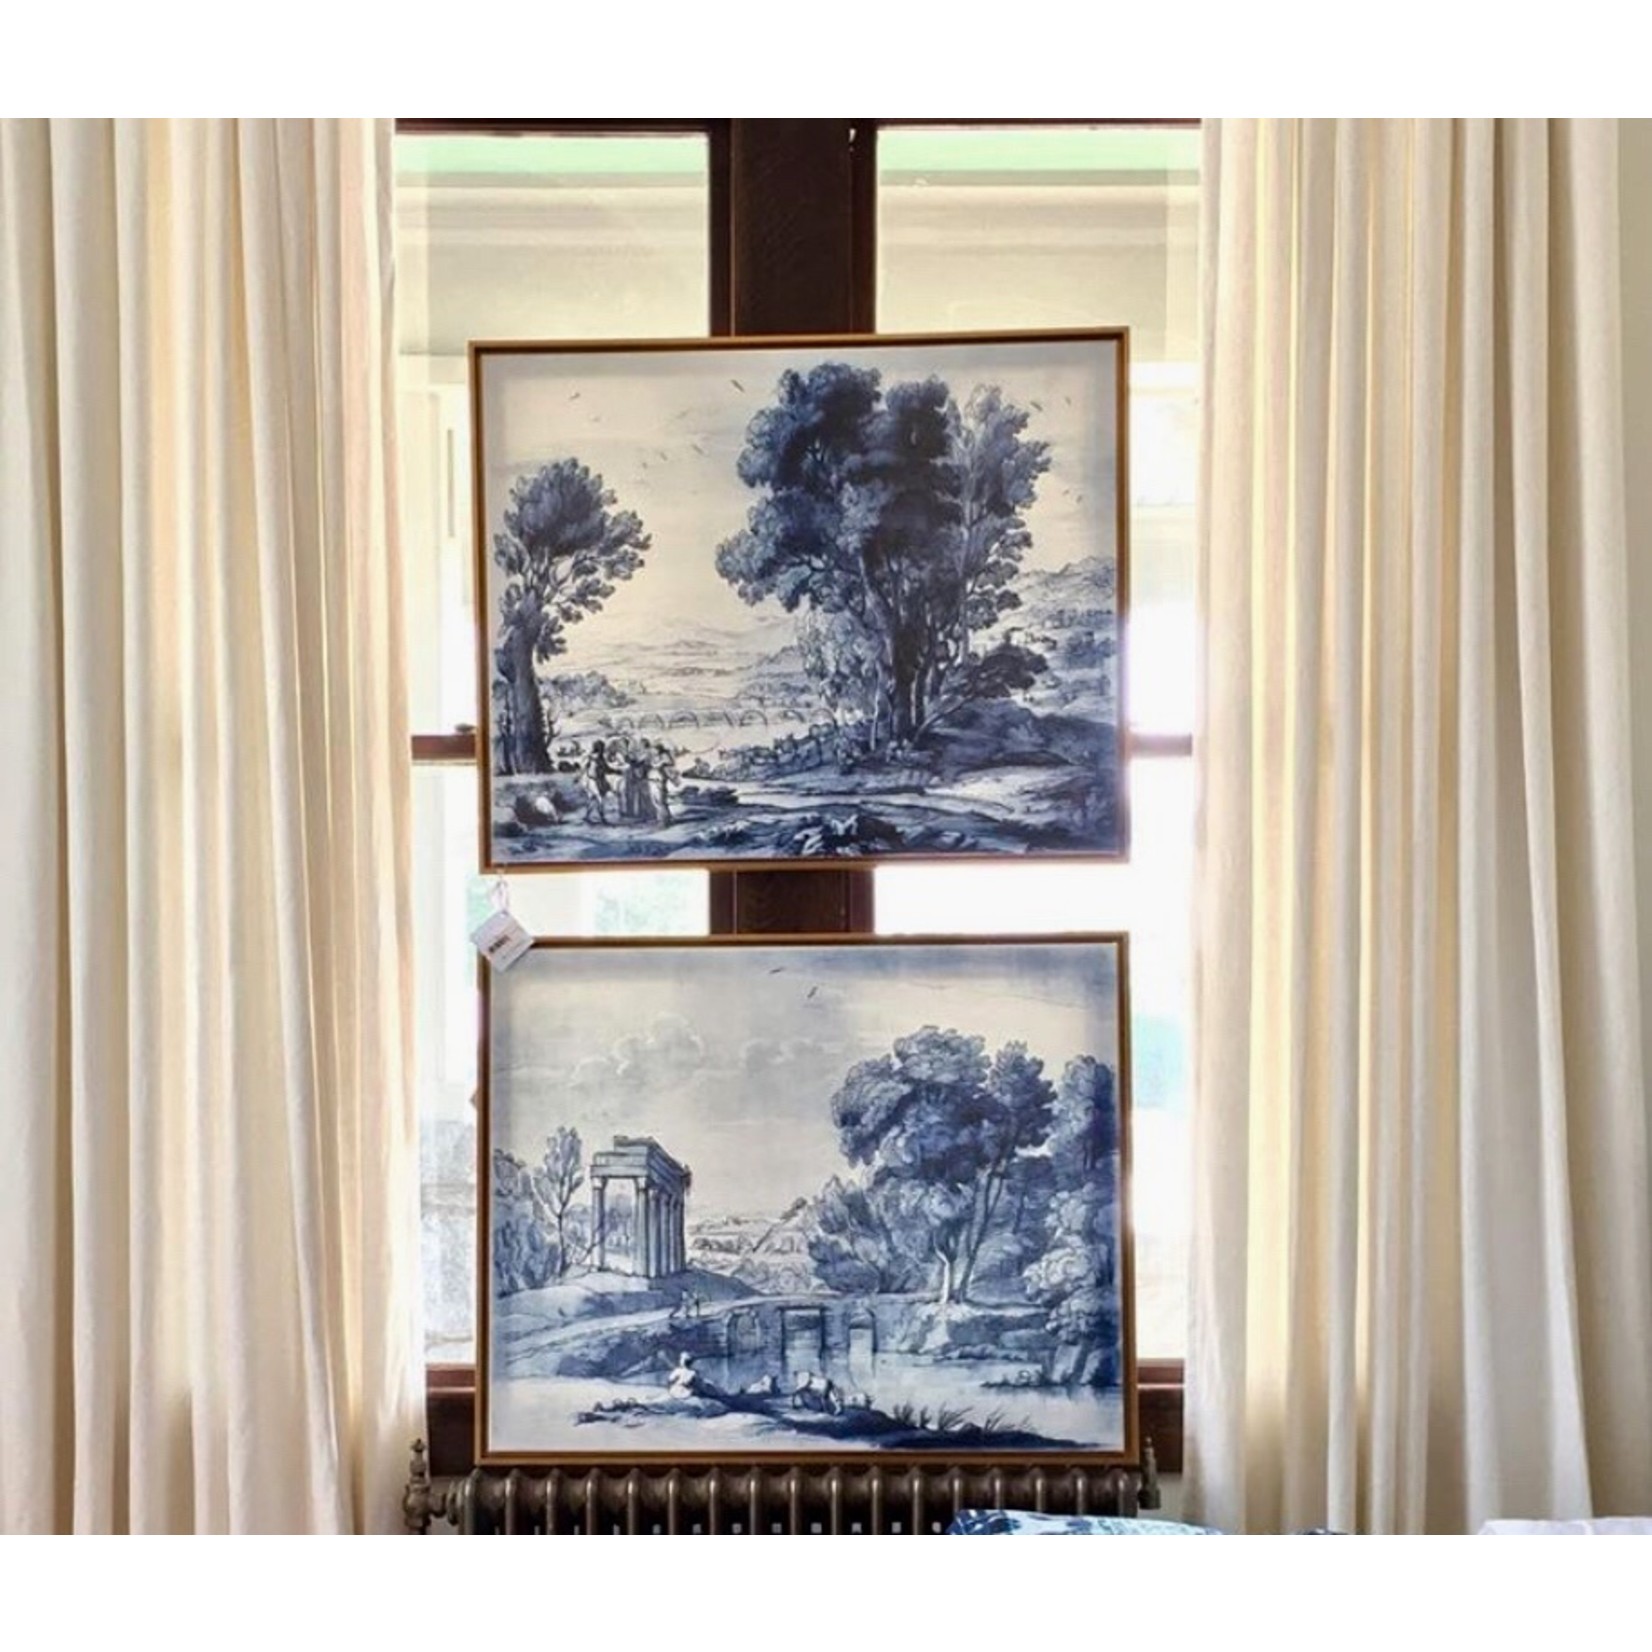 Framed Print on Canvas: Pastoral 2 from the collection of The Duke of Devonshire